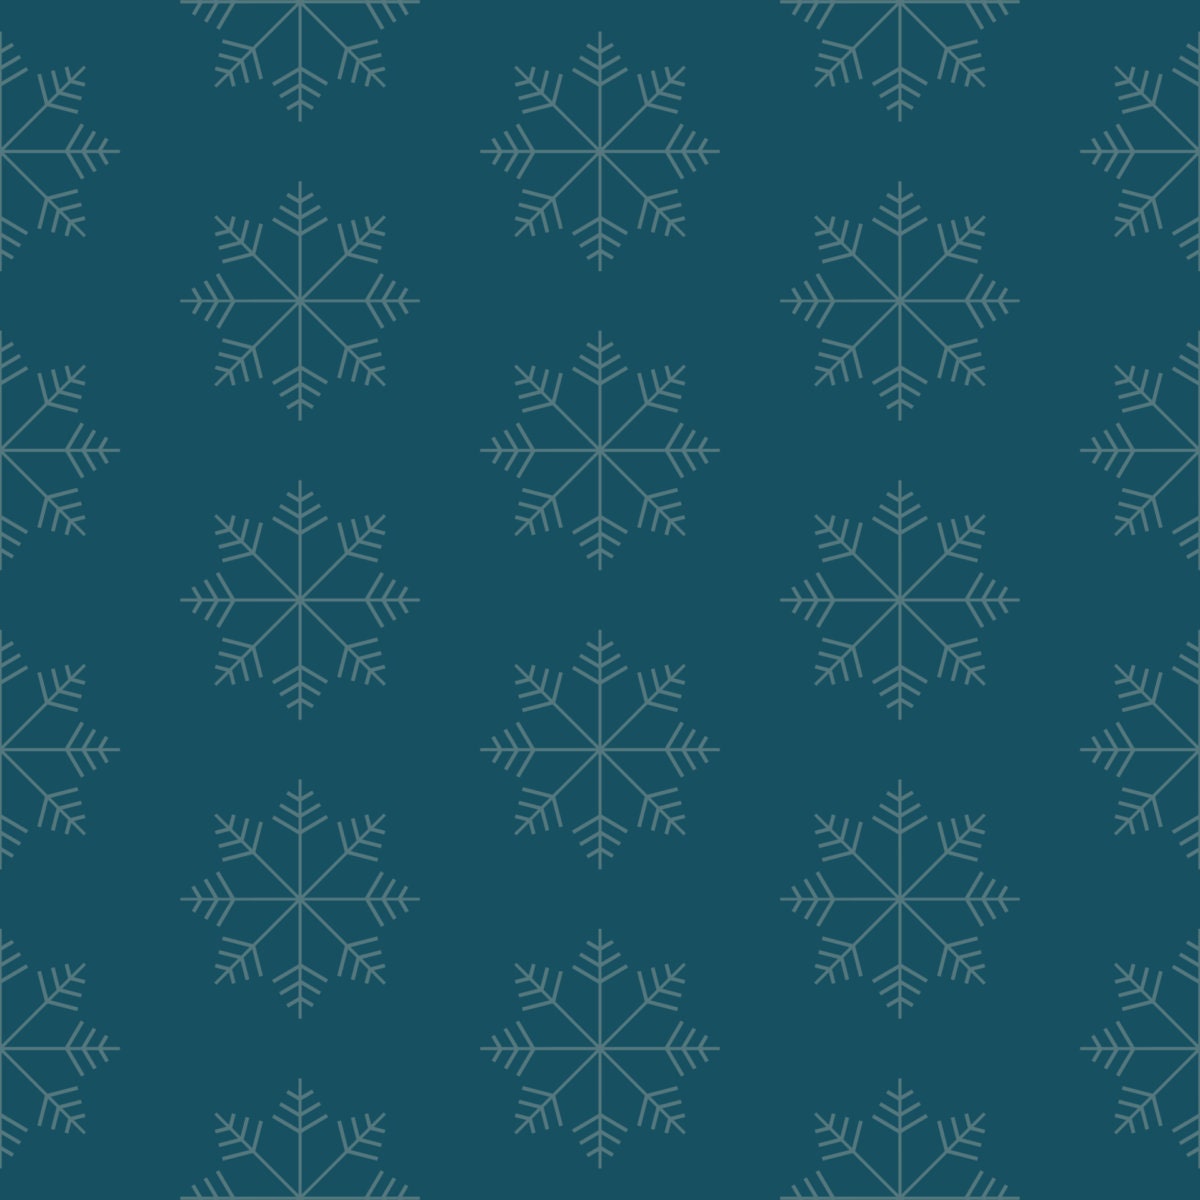 Holiday Patterns 2 XIX, Surface Design